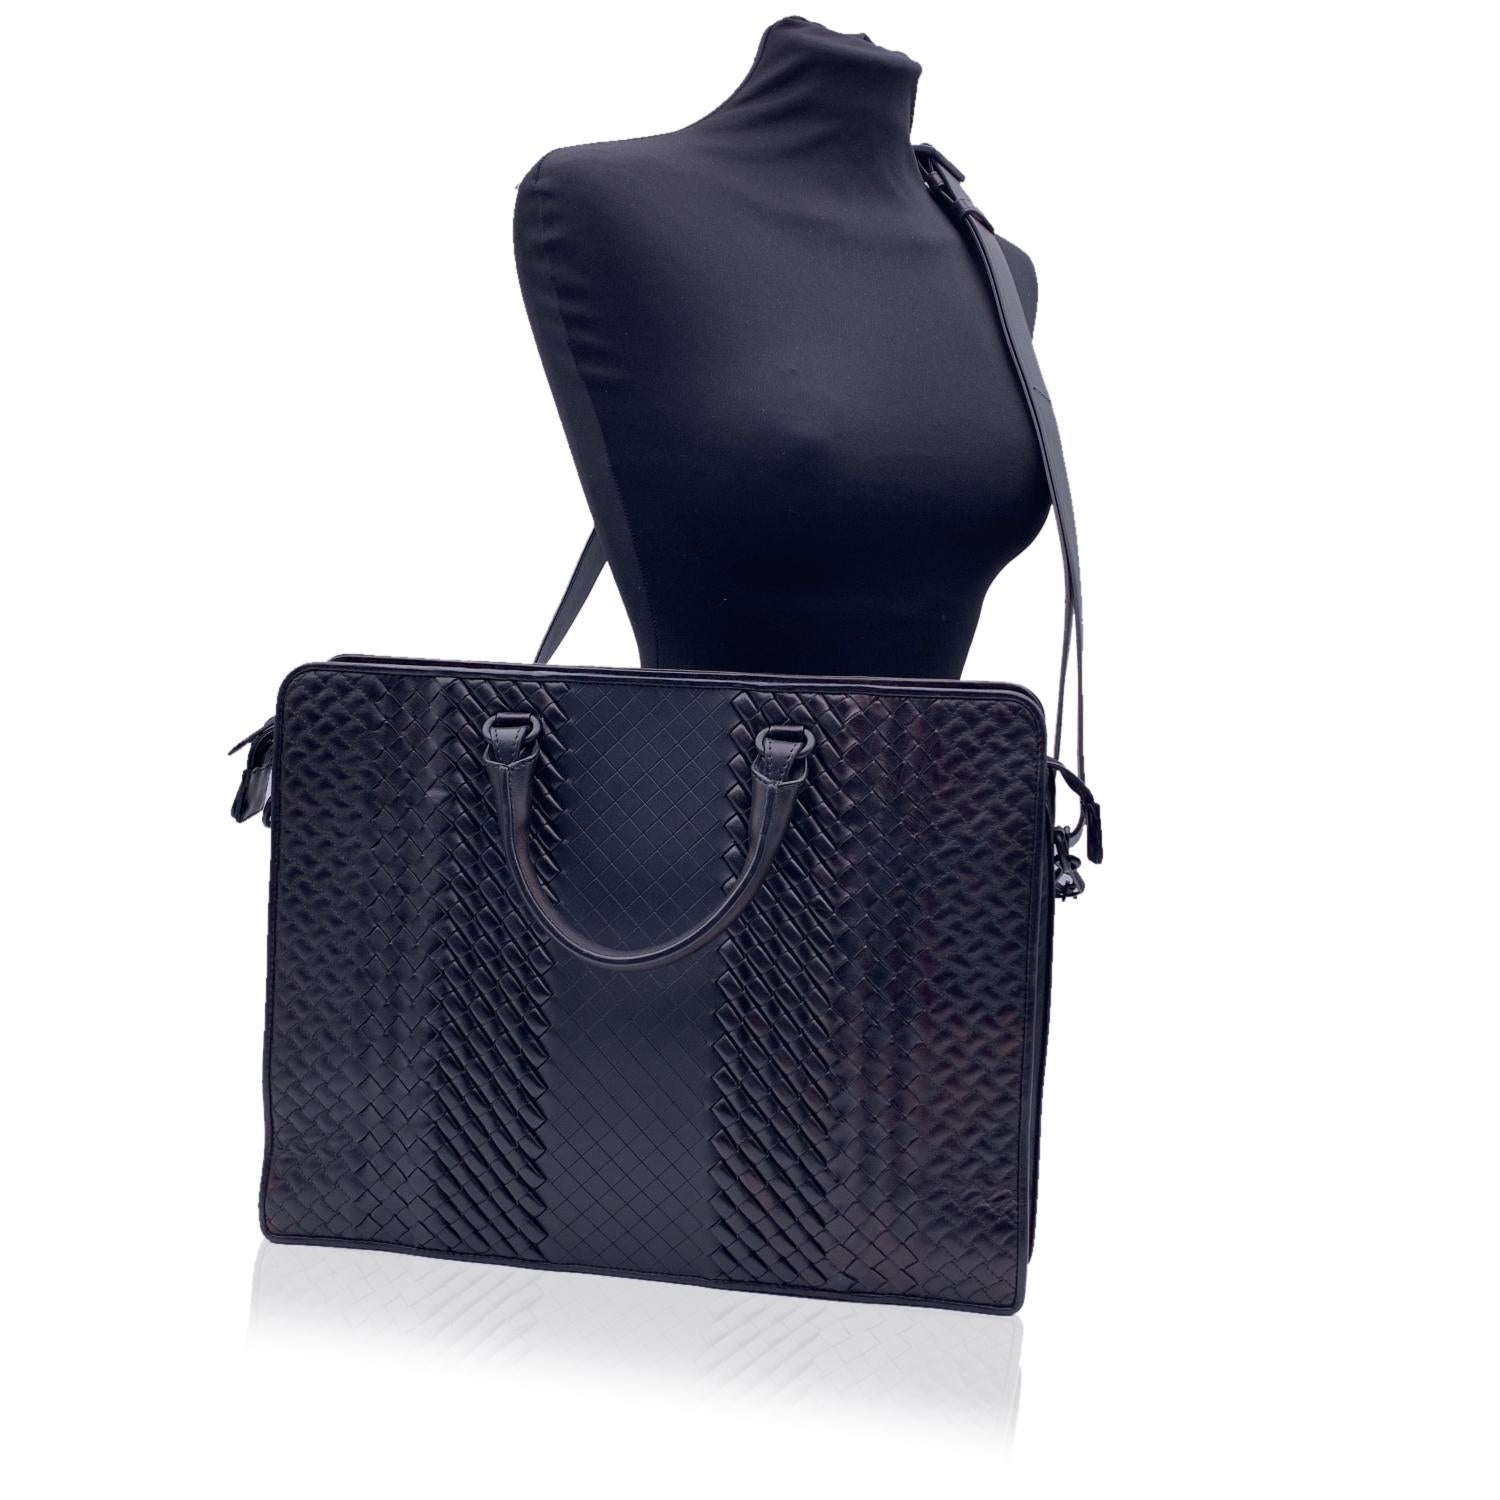 This beautiful Bag will come with a Certificate of Authenticity provided by Entrupy. The certificate will be provided at no further cost.

Bottega Veneta black leather 'Imperatore' briefcase featuring 'Intrecciato' woven design. Double handles and